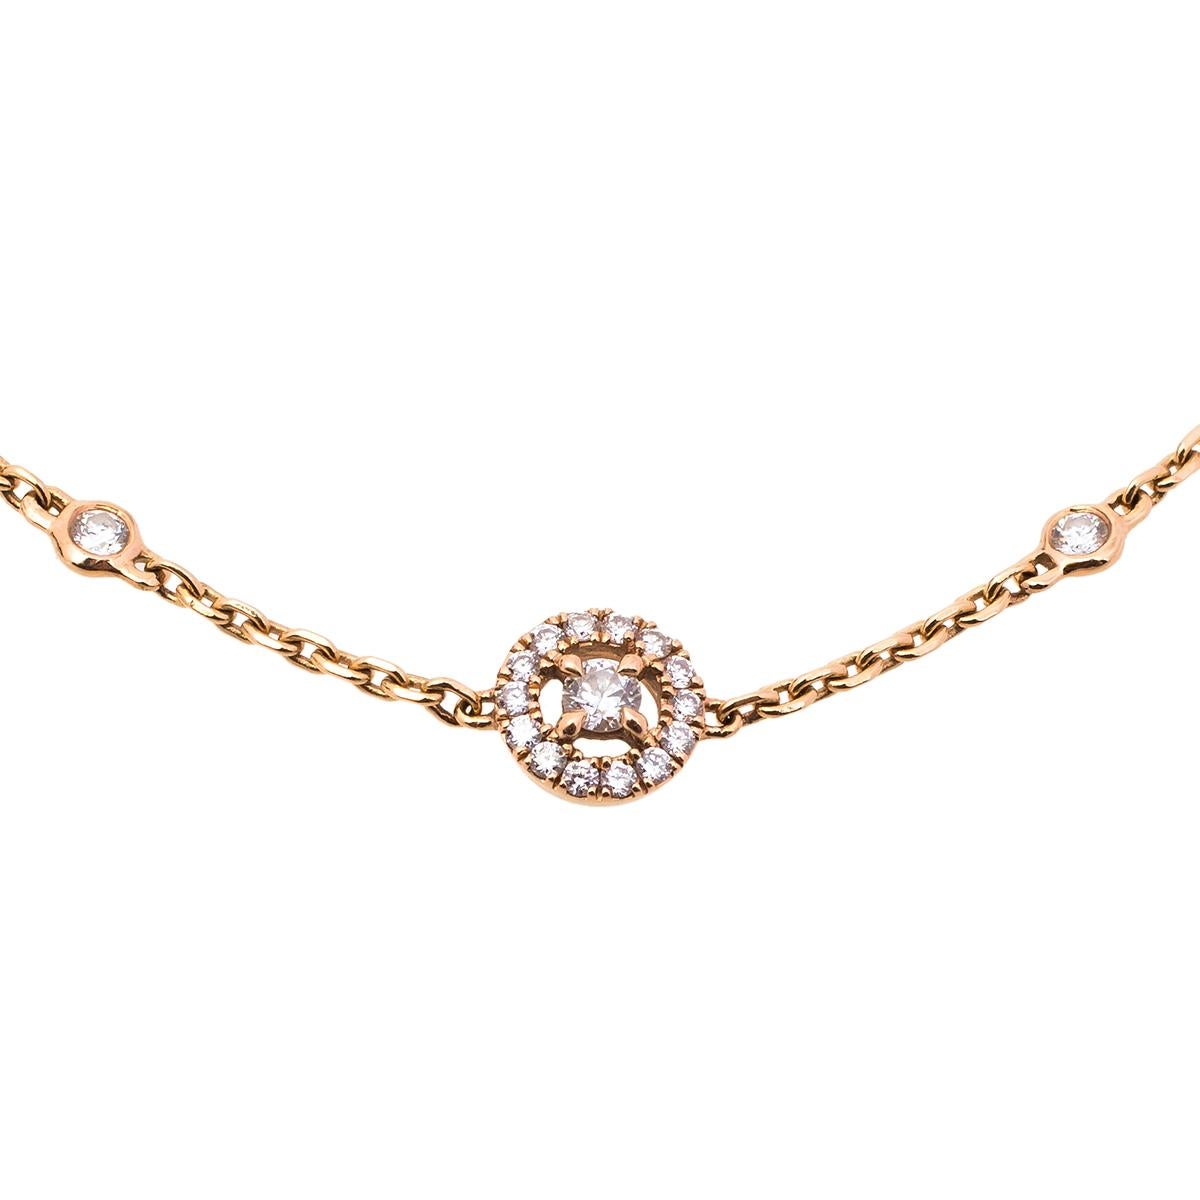 Precious diamonds that last forever. Messika's Joy bracelet is a priceless jewel that is glamourous, light, and wearable. Made from 18k rose gold, the bracelet has a central motif of a diamond guarded by a halo of more diamonds. This beautiful